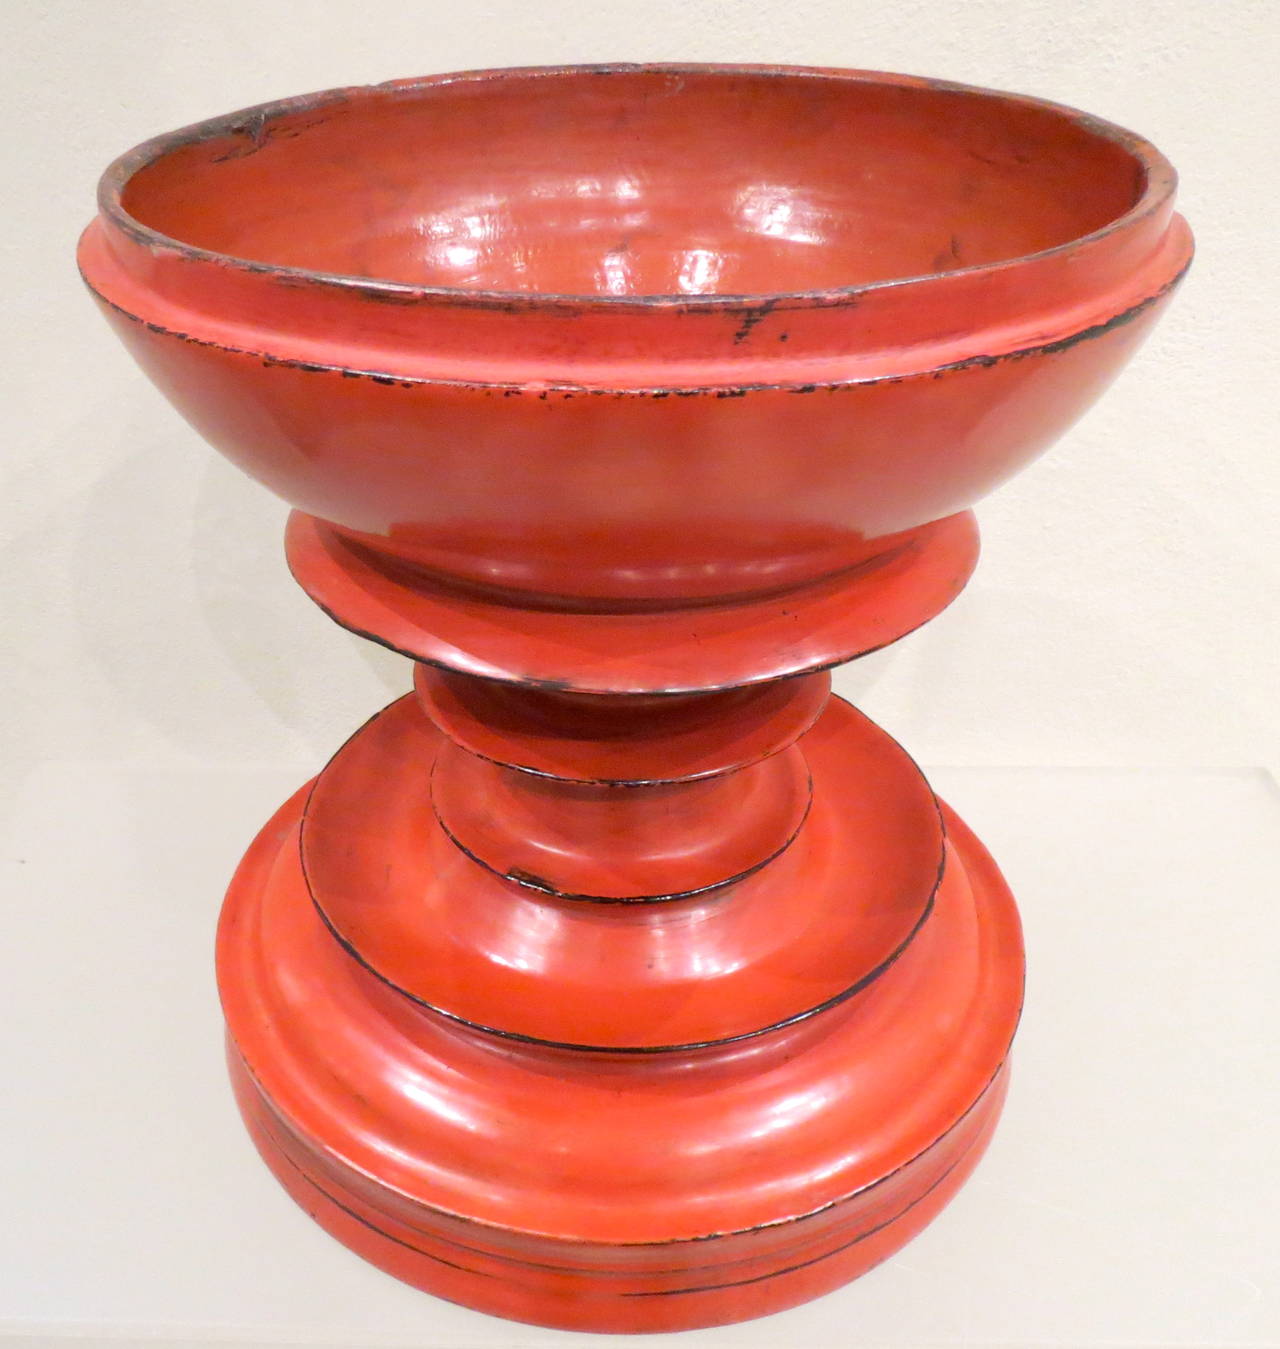 Late 19th century Burmese
red lacquer special
ceremonial offering vessel.
Detailed spire form the top of
the lid, stepped curved ring
molded bowl above round
base. Multiple layers of red
lacquer adorn this
pagoda shaped ceremonial
vessel.